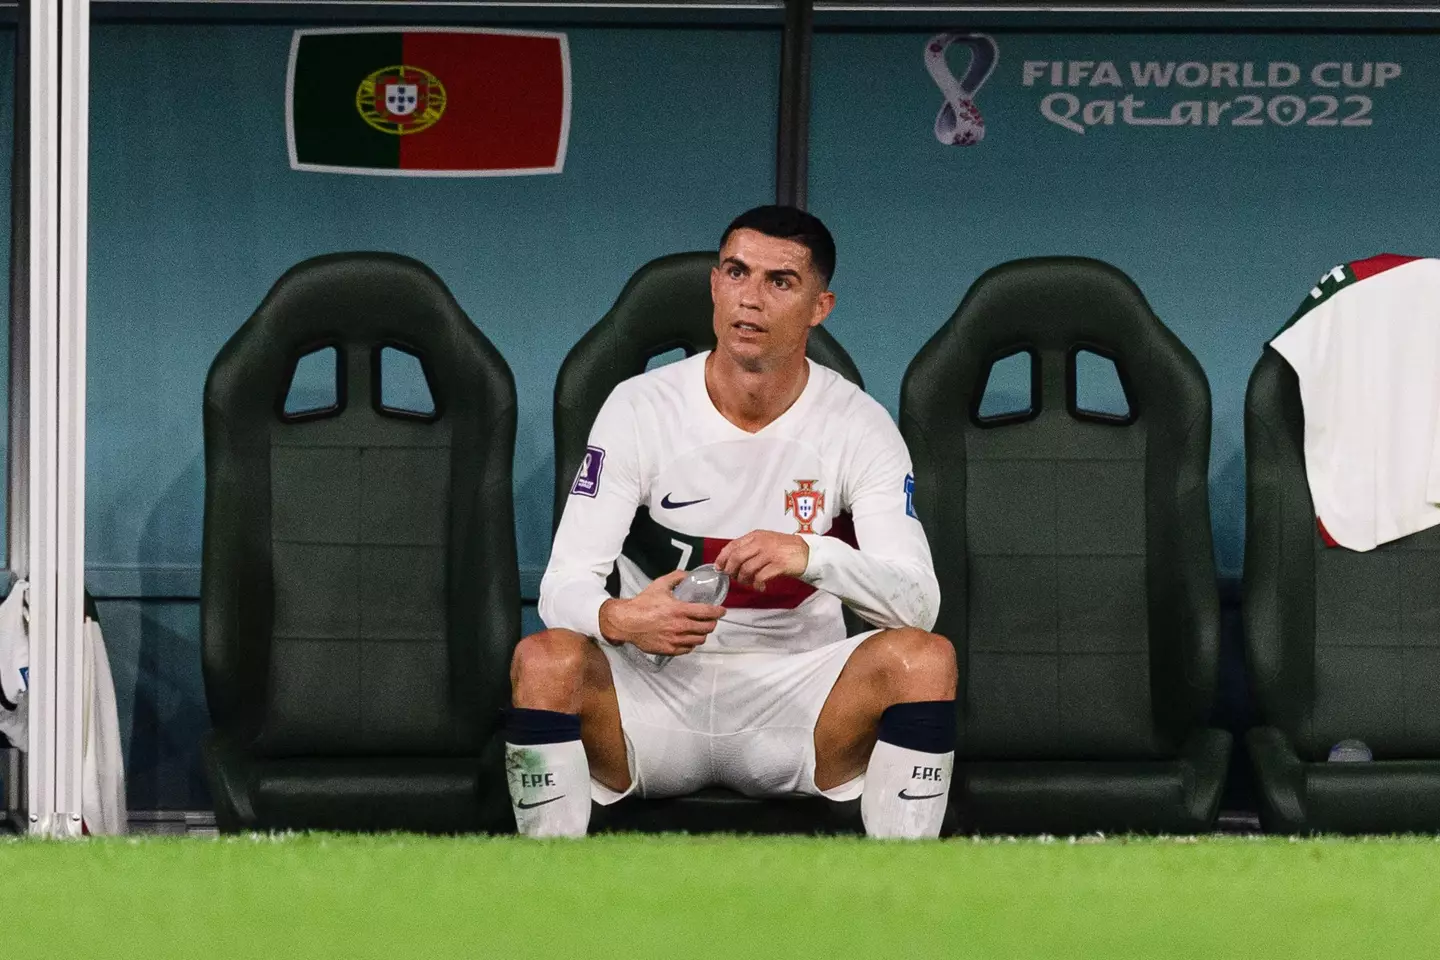 Ronaldo was taken off during the game against South Korea. Image: Alamy